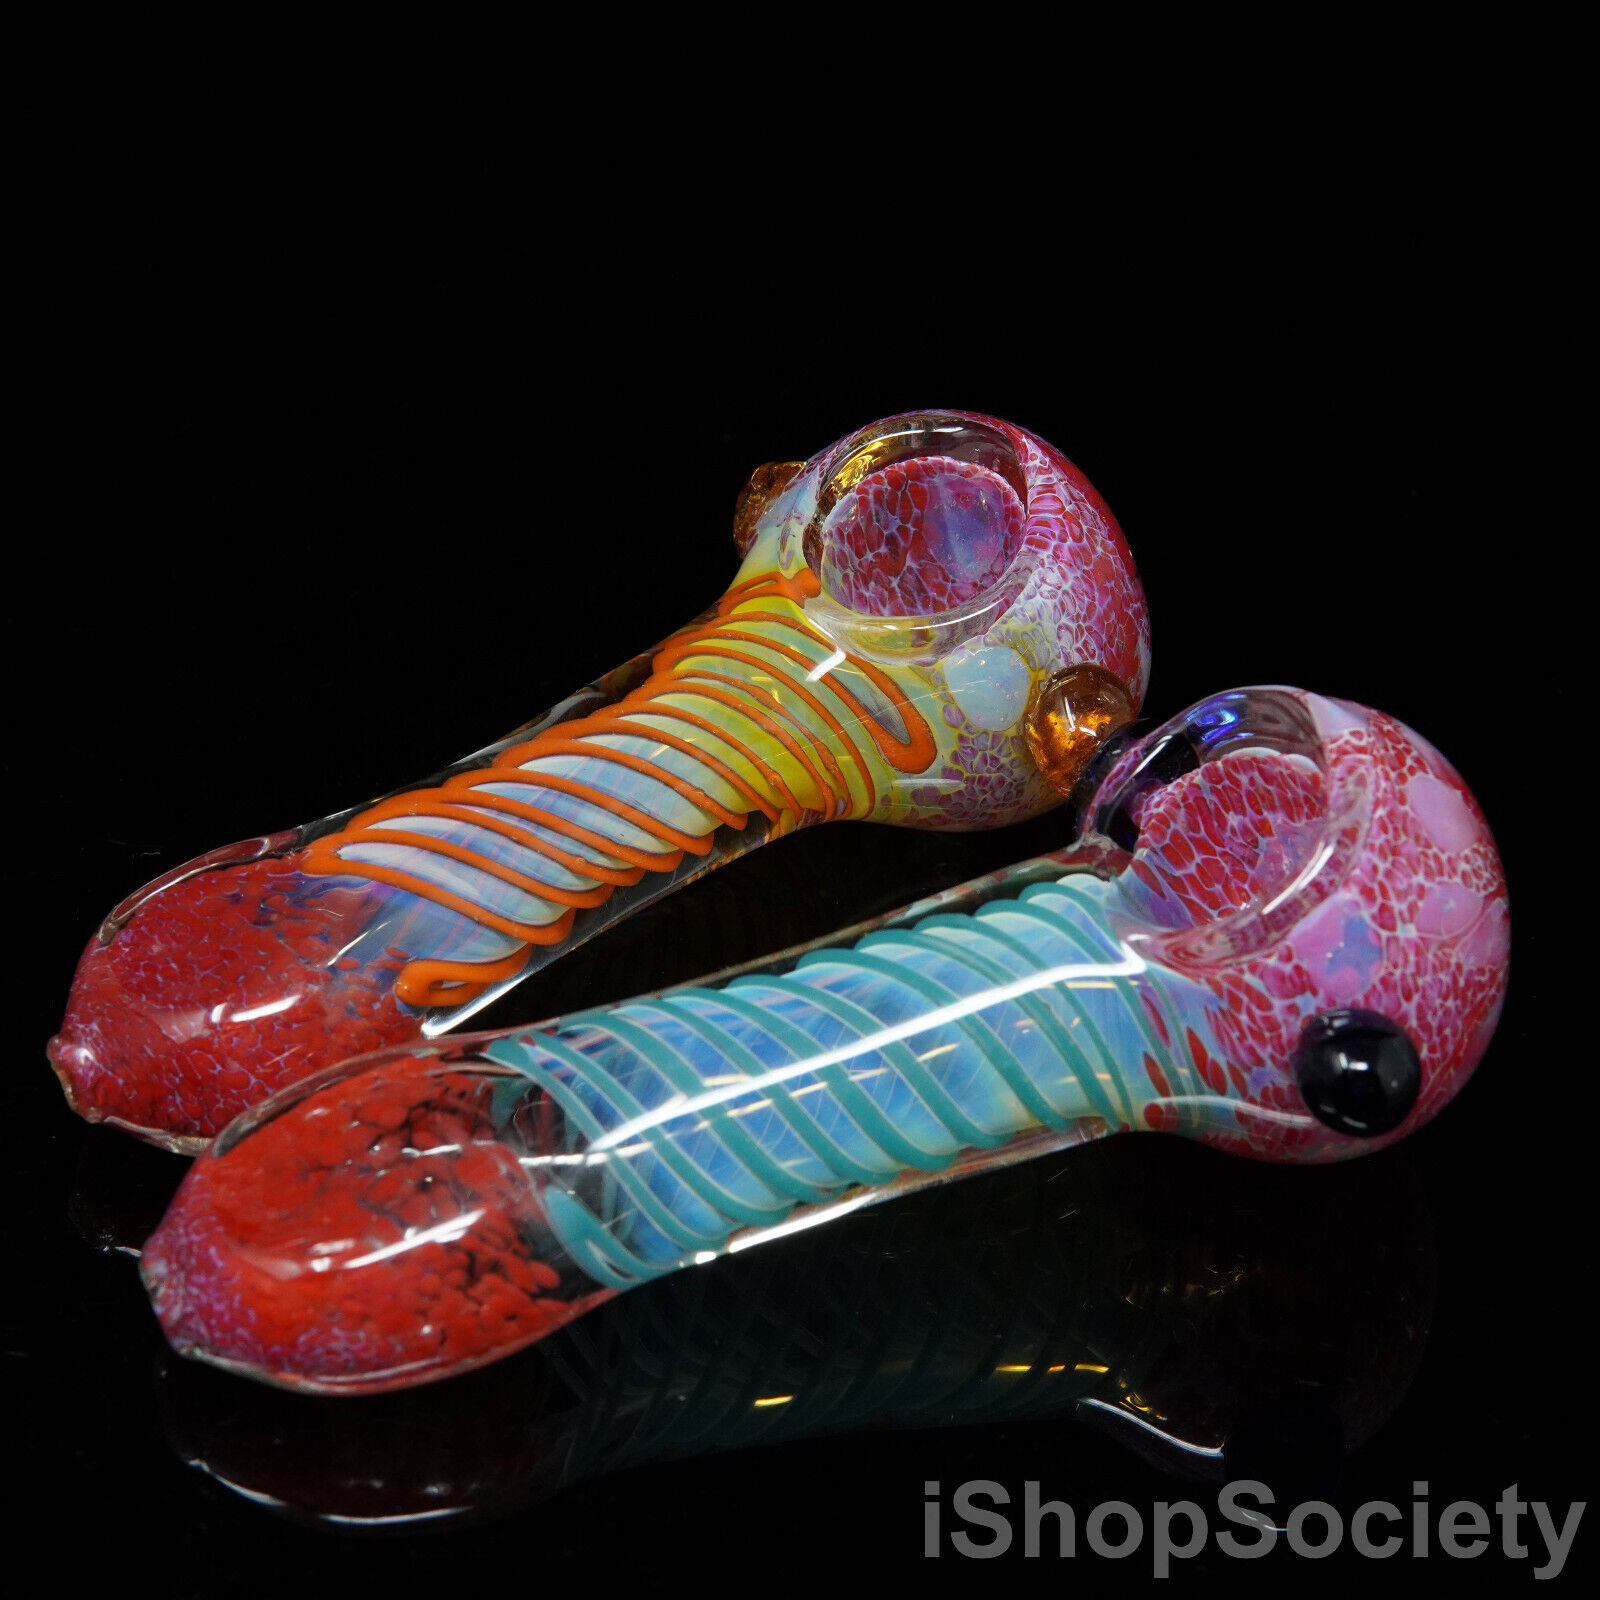 4.5 Fumed Cyborg Swirl Tobacco Smoking Pipe Thick Collectible Pipes - P130C. Available Now for 12.99